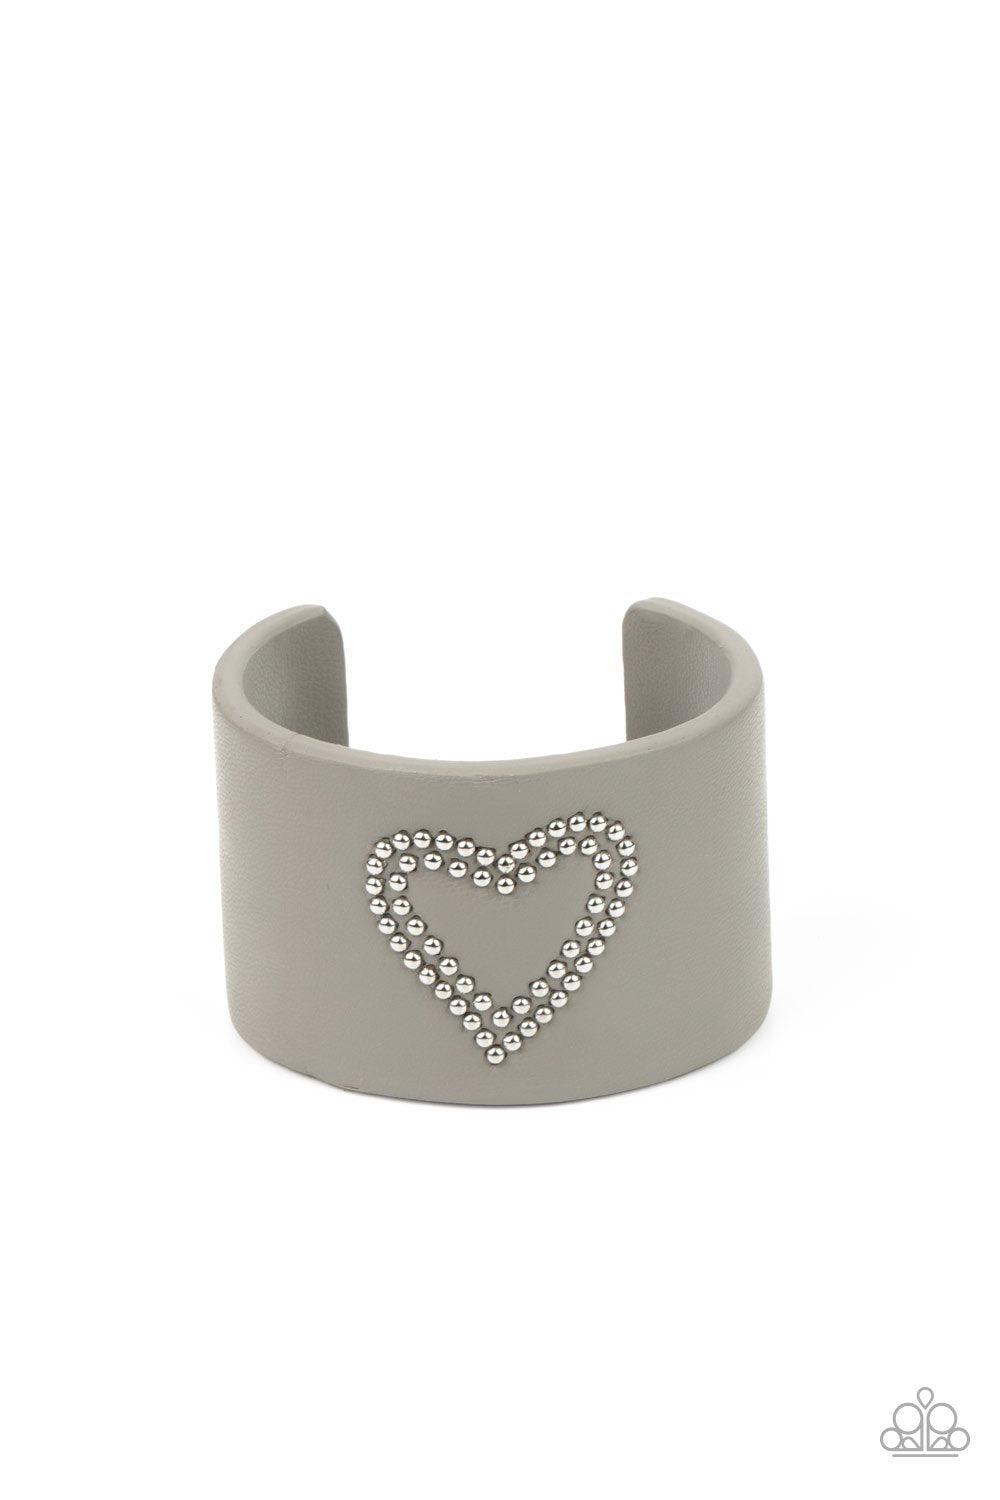 Rodeo Romance Silver Leather Heart Cuff Bracelet - Paparazzi Accessories- lightbox - CarasShop.com - $5 Jewelry by Cara Jewels